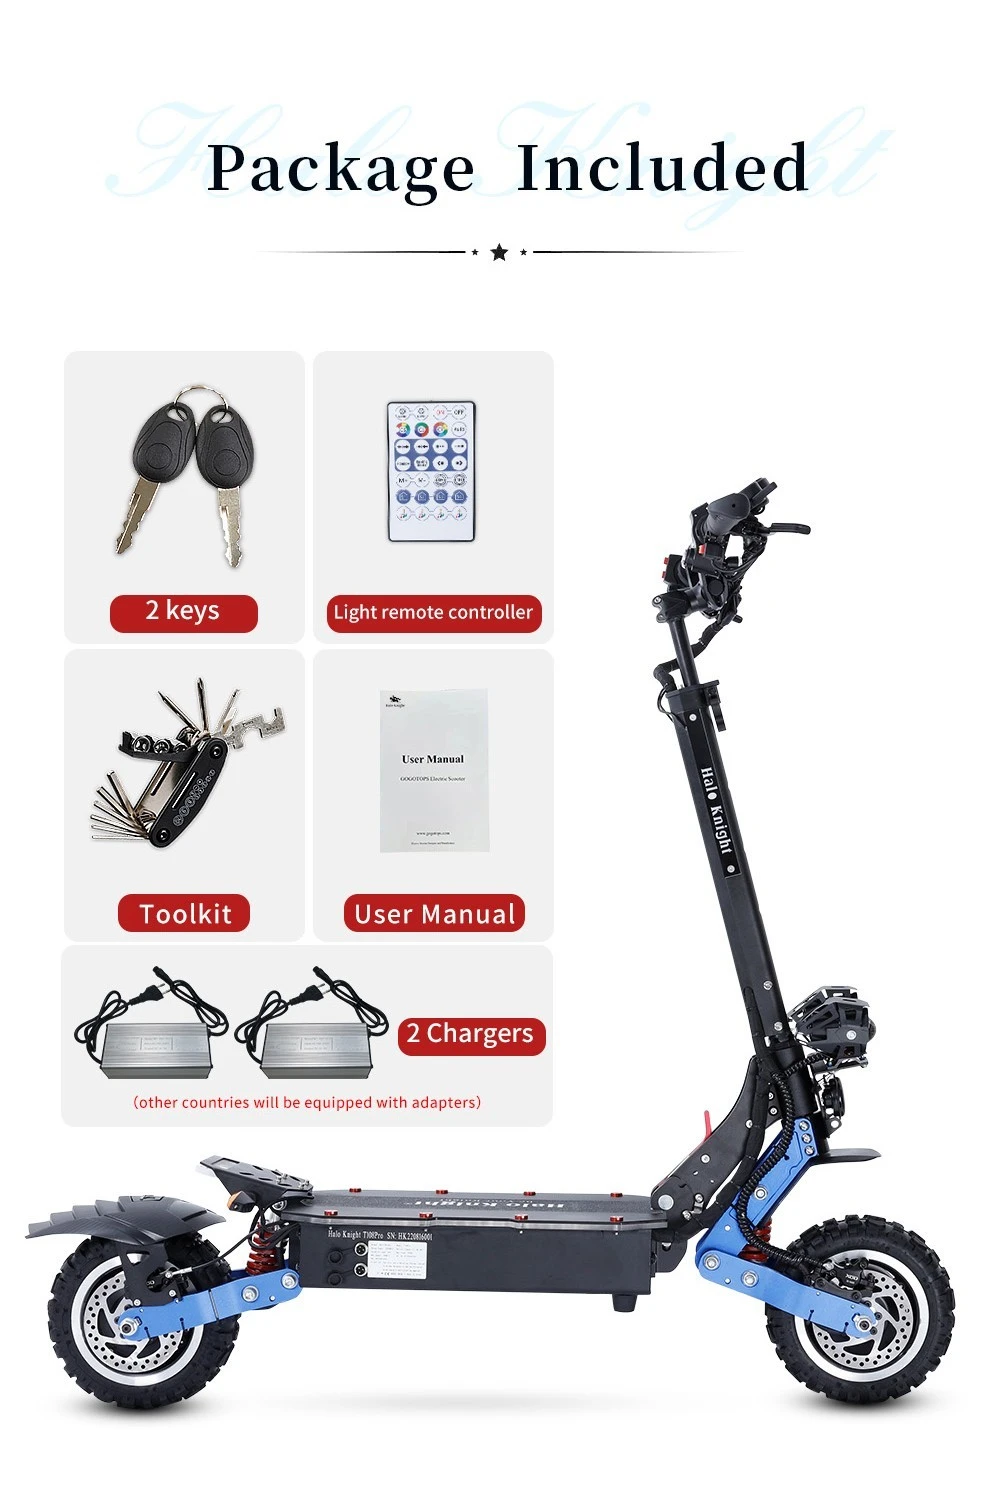 https://img.gkbcdn.com/d/202303/Halo-Knight-T108-Pro-Electric-Scooter-11---Off-road-Tire-519912-18._p1_.jpg